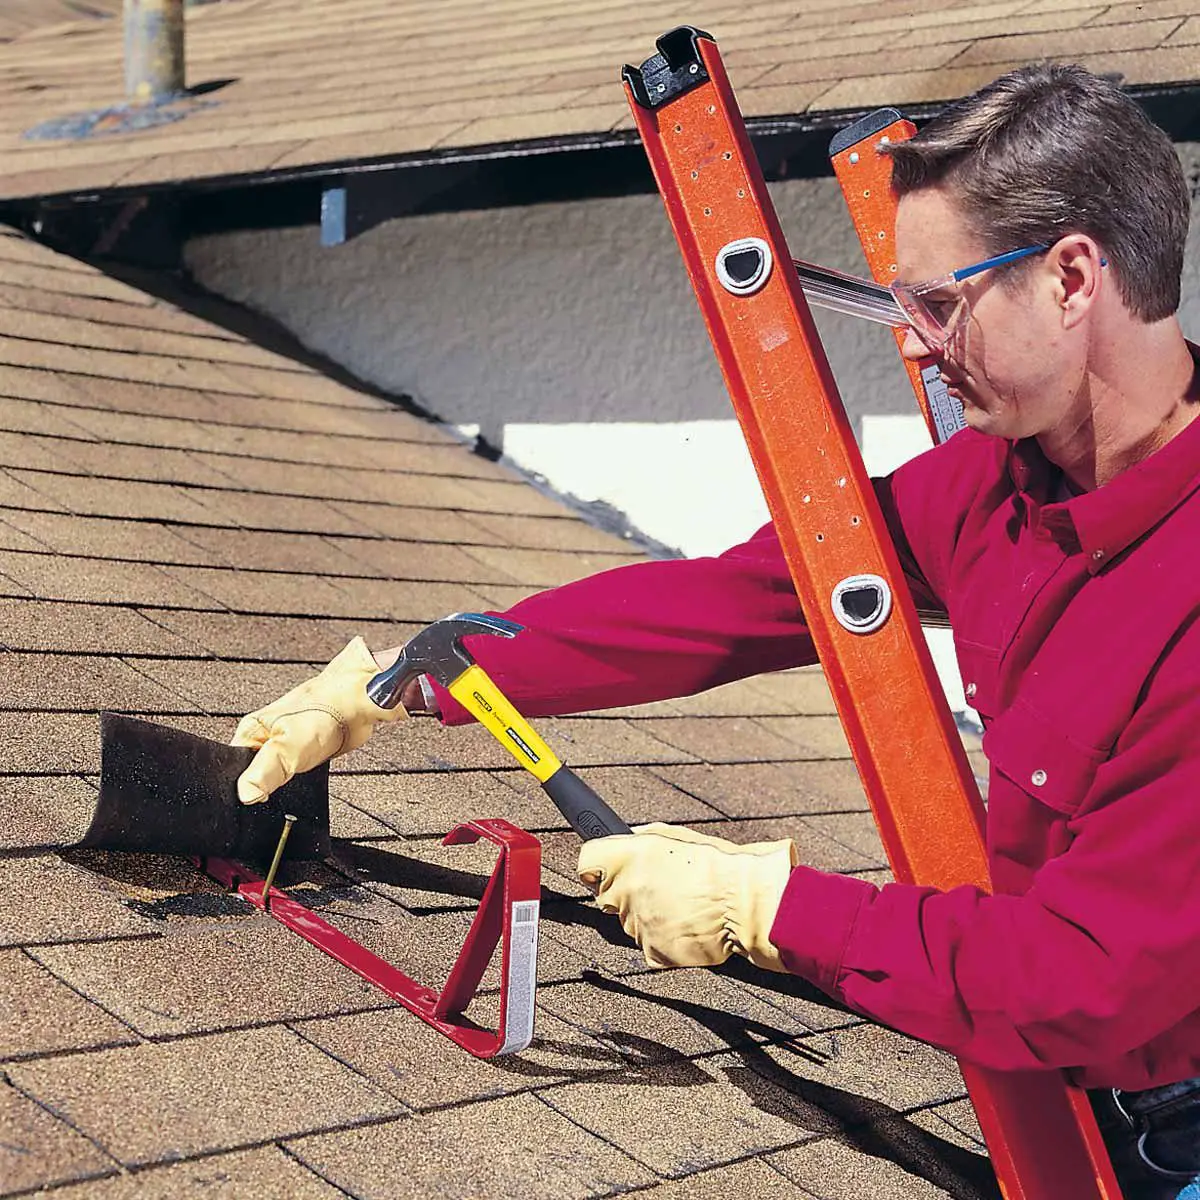 Chimney Cleaning: When to Clean a Chimney Flue